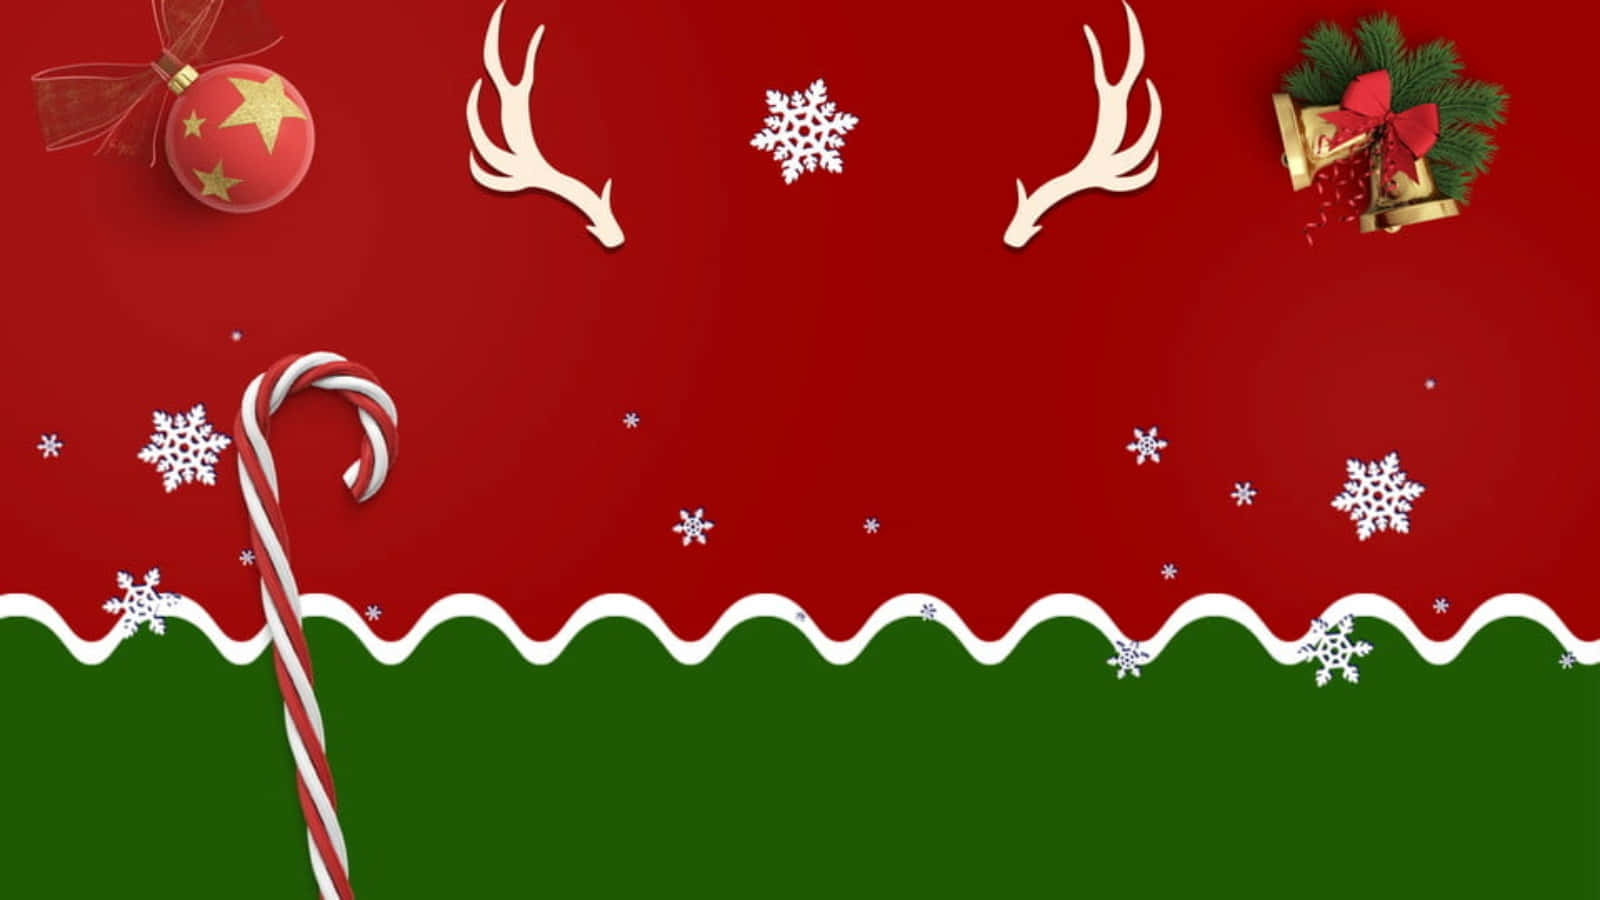 Christmas Decorations in Rich Red and Green Colors Wallpaper